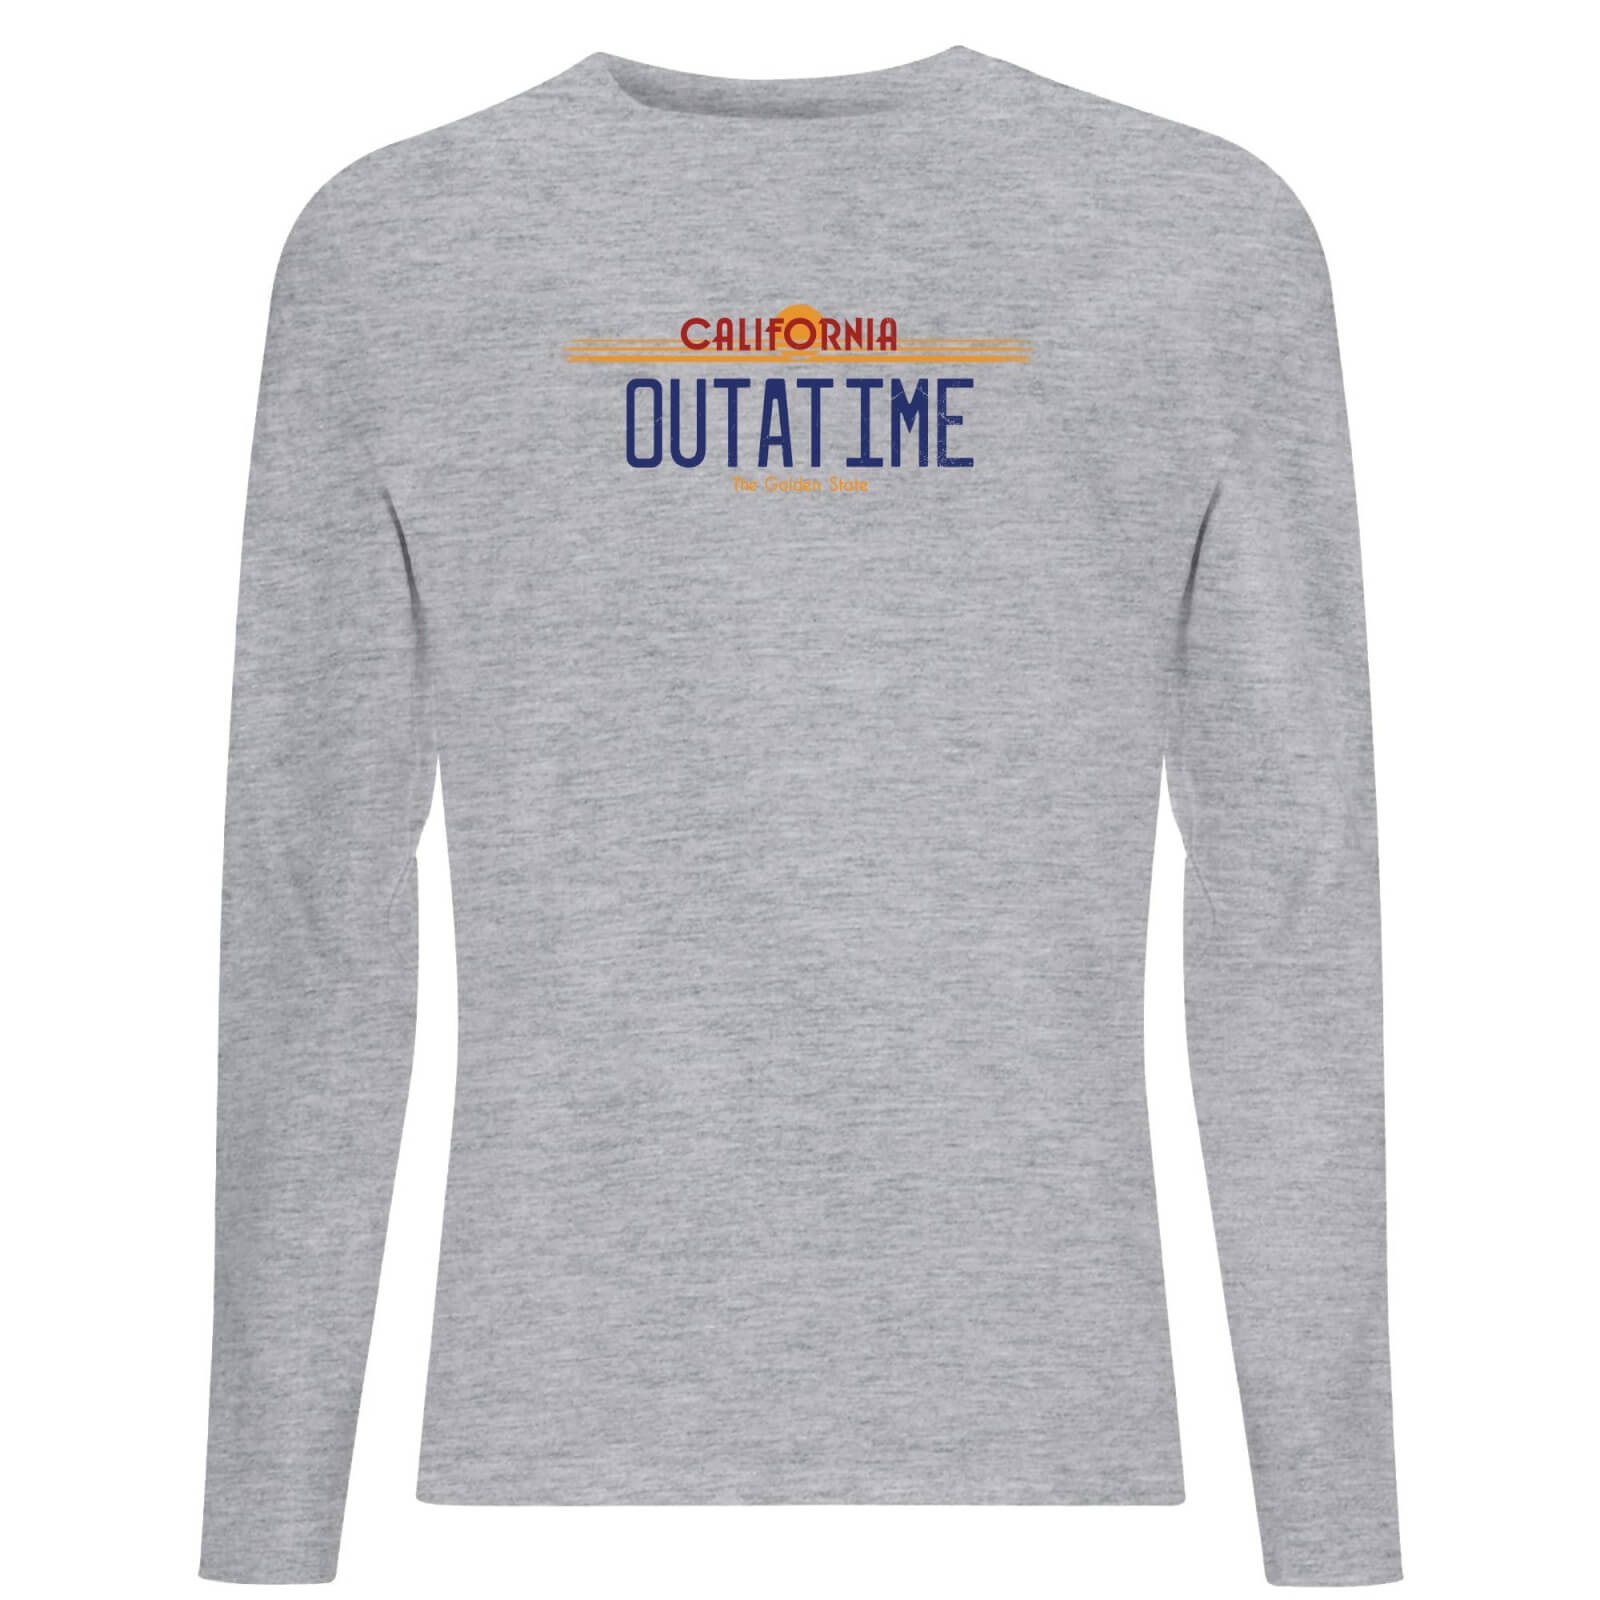 Image of Back To The Future Outatime Plate Unisex Long Sleeve T-Shirt - Grey - S - Grau